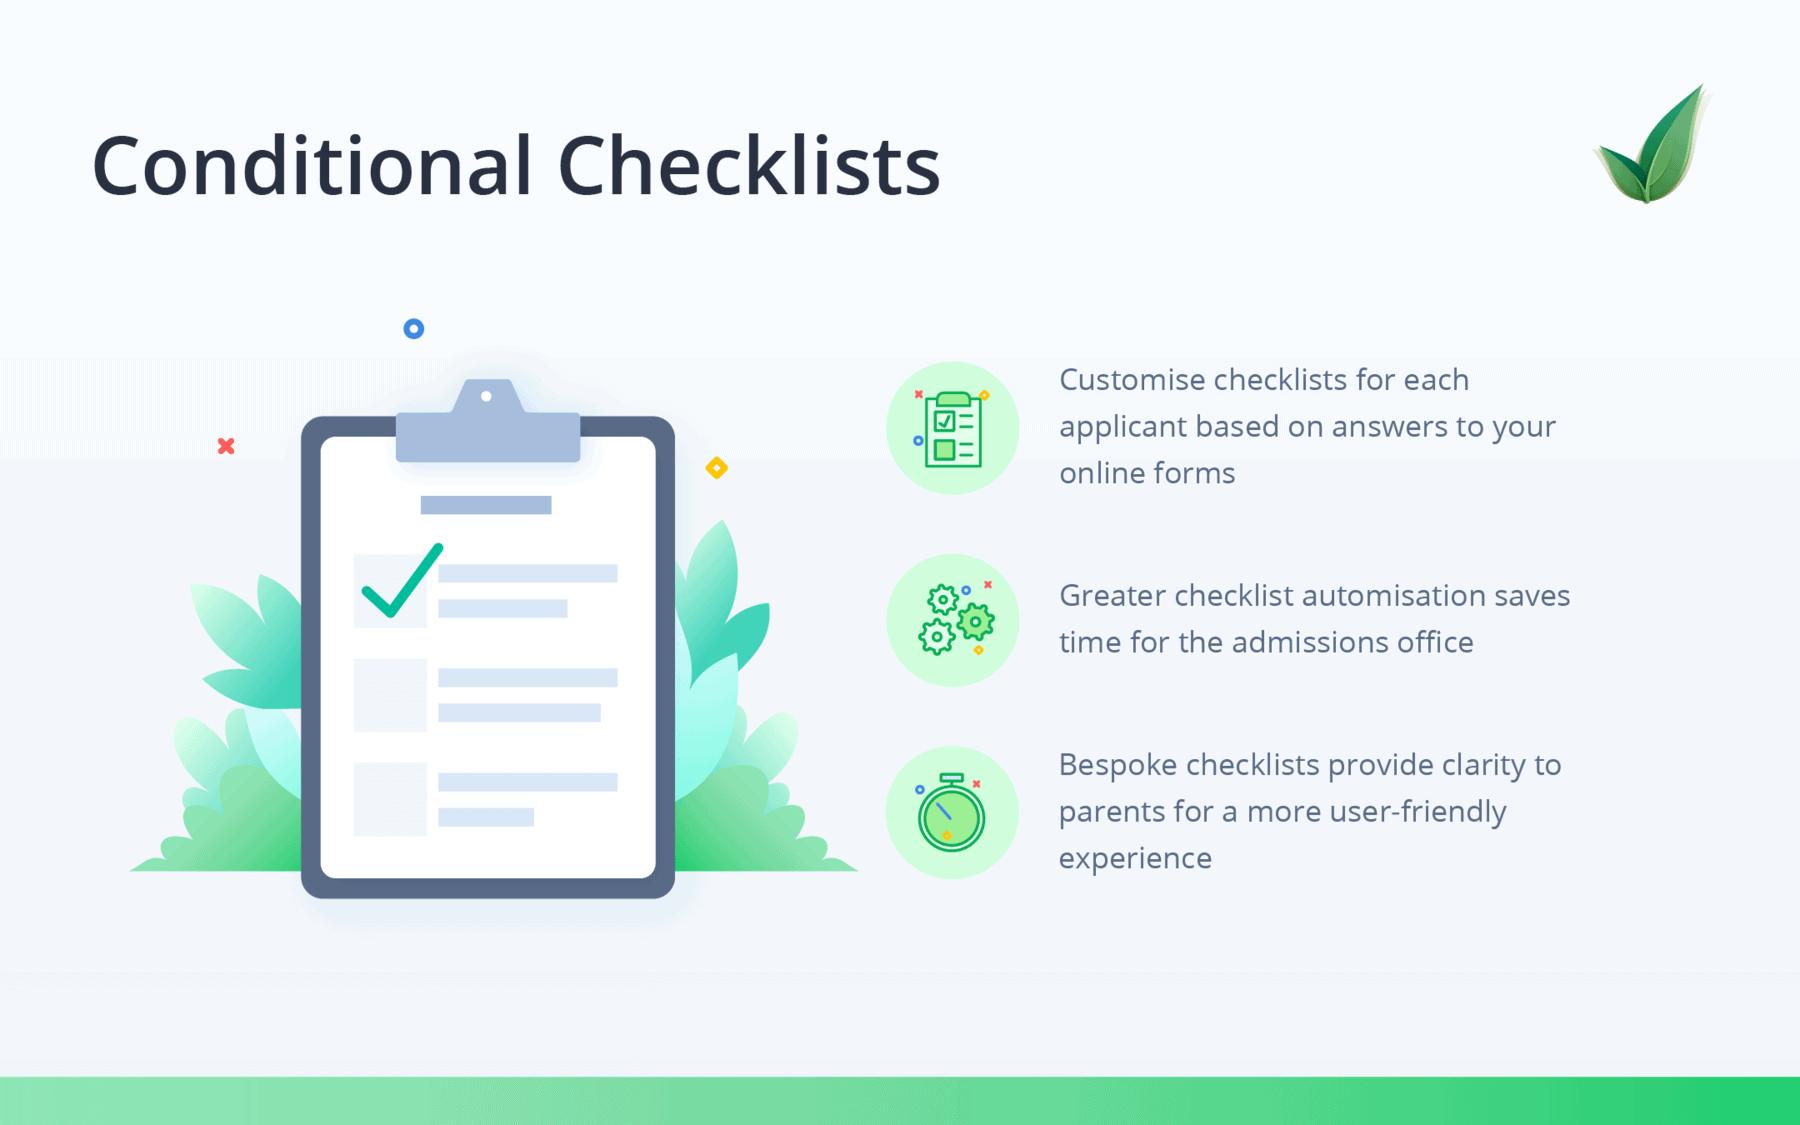 Introducing Conditional Checklists!